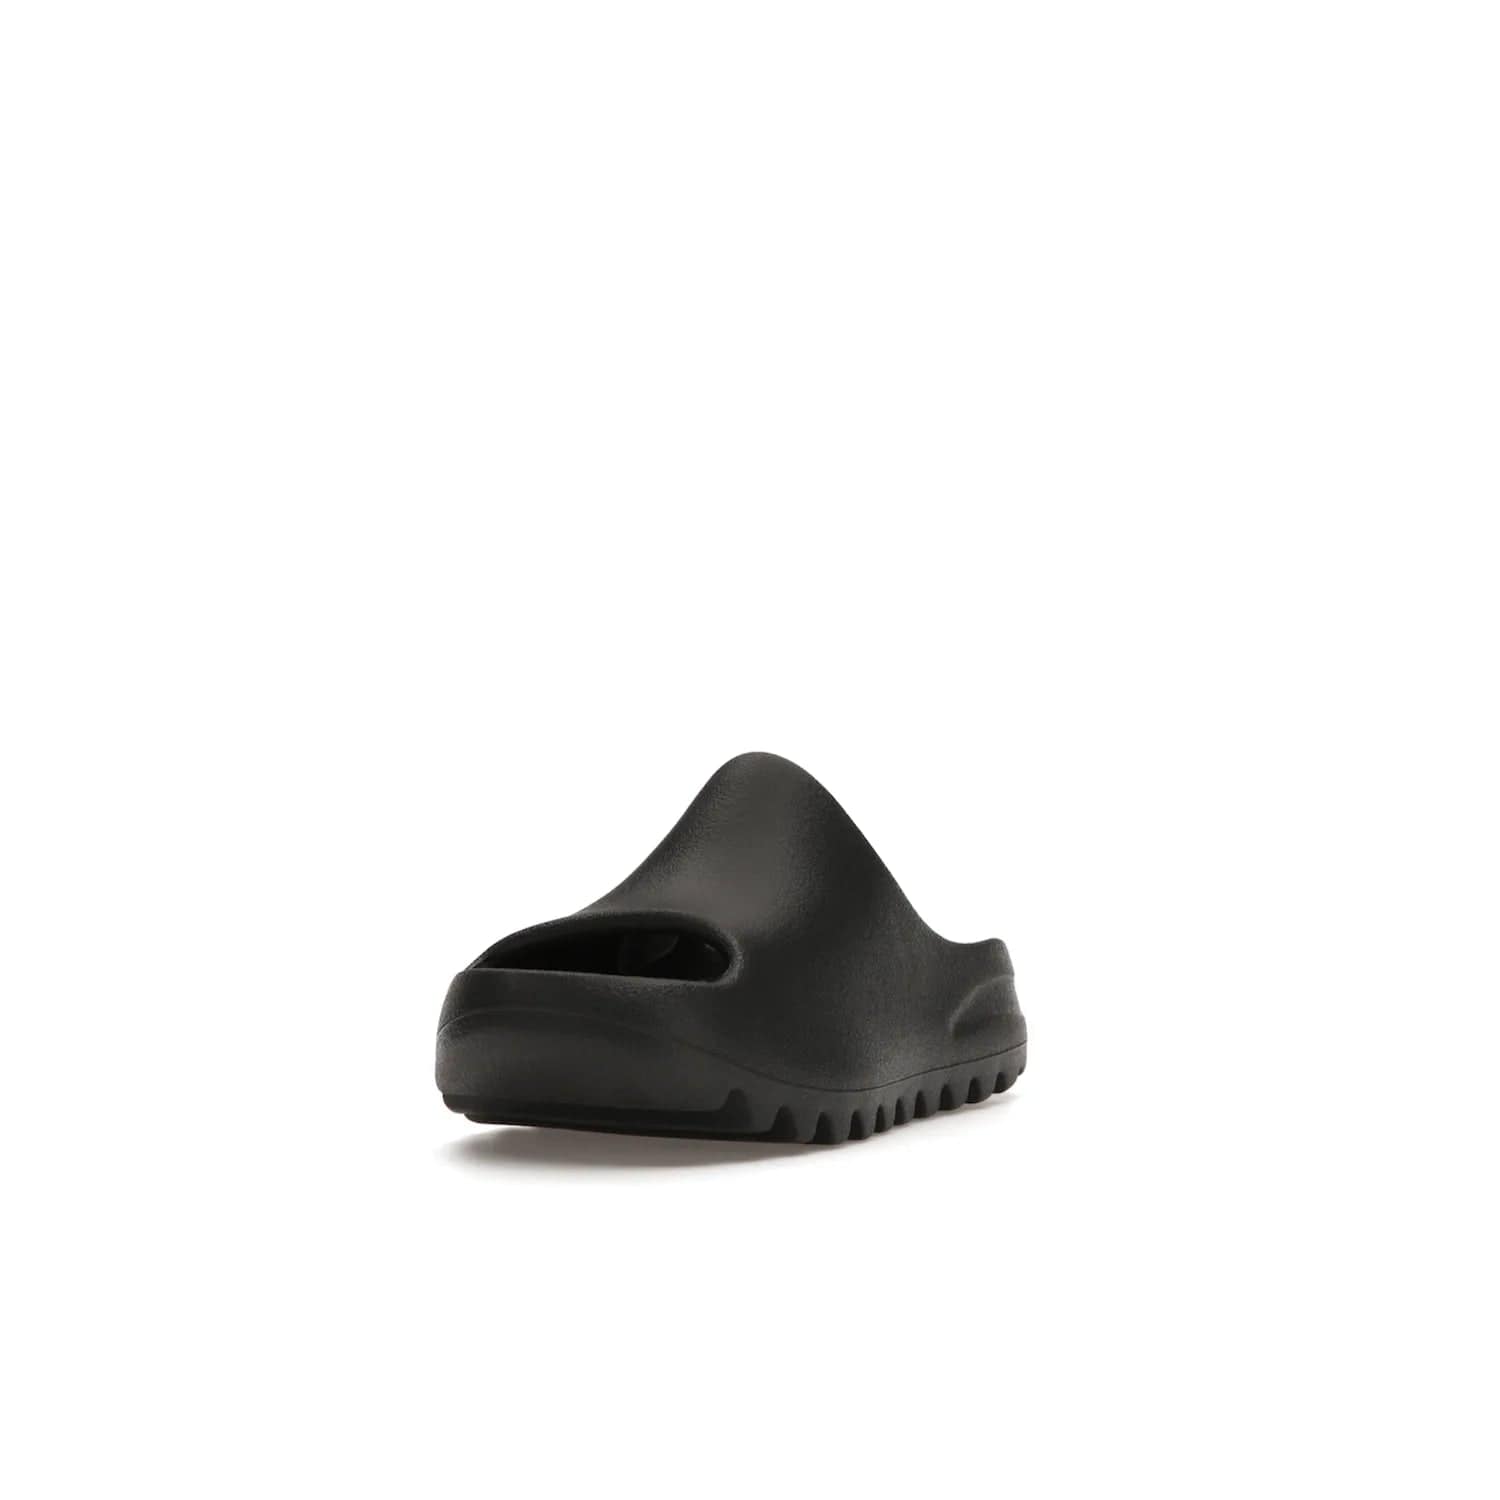 adidas Yeezy Slide Onyx (Kids) - Image 13 - Only at www.BallersClubKickz.com - adidas Yeezy Slide Onyx (Kids): Comfortable foam construction with textured surface and iconic three-stripe logo. Breathable, open-toe design and deep grooves for traction. Released in March 2021 at $50.